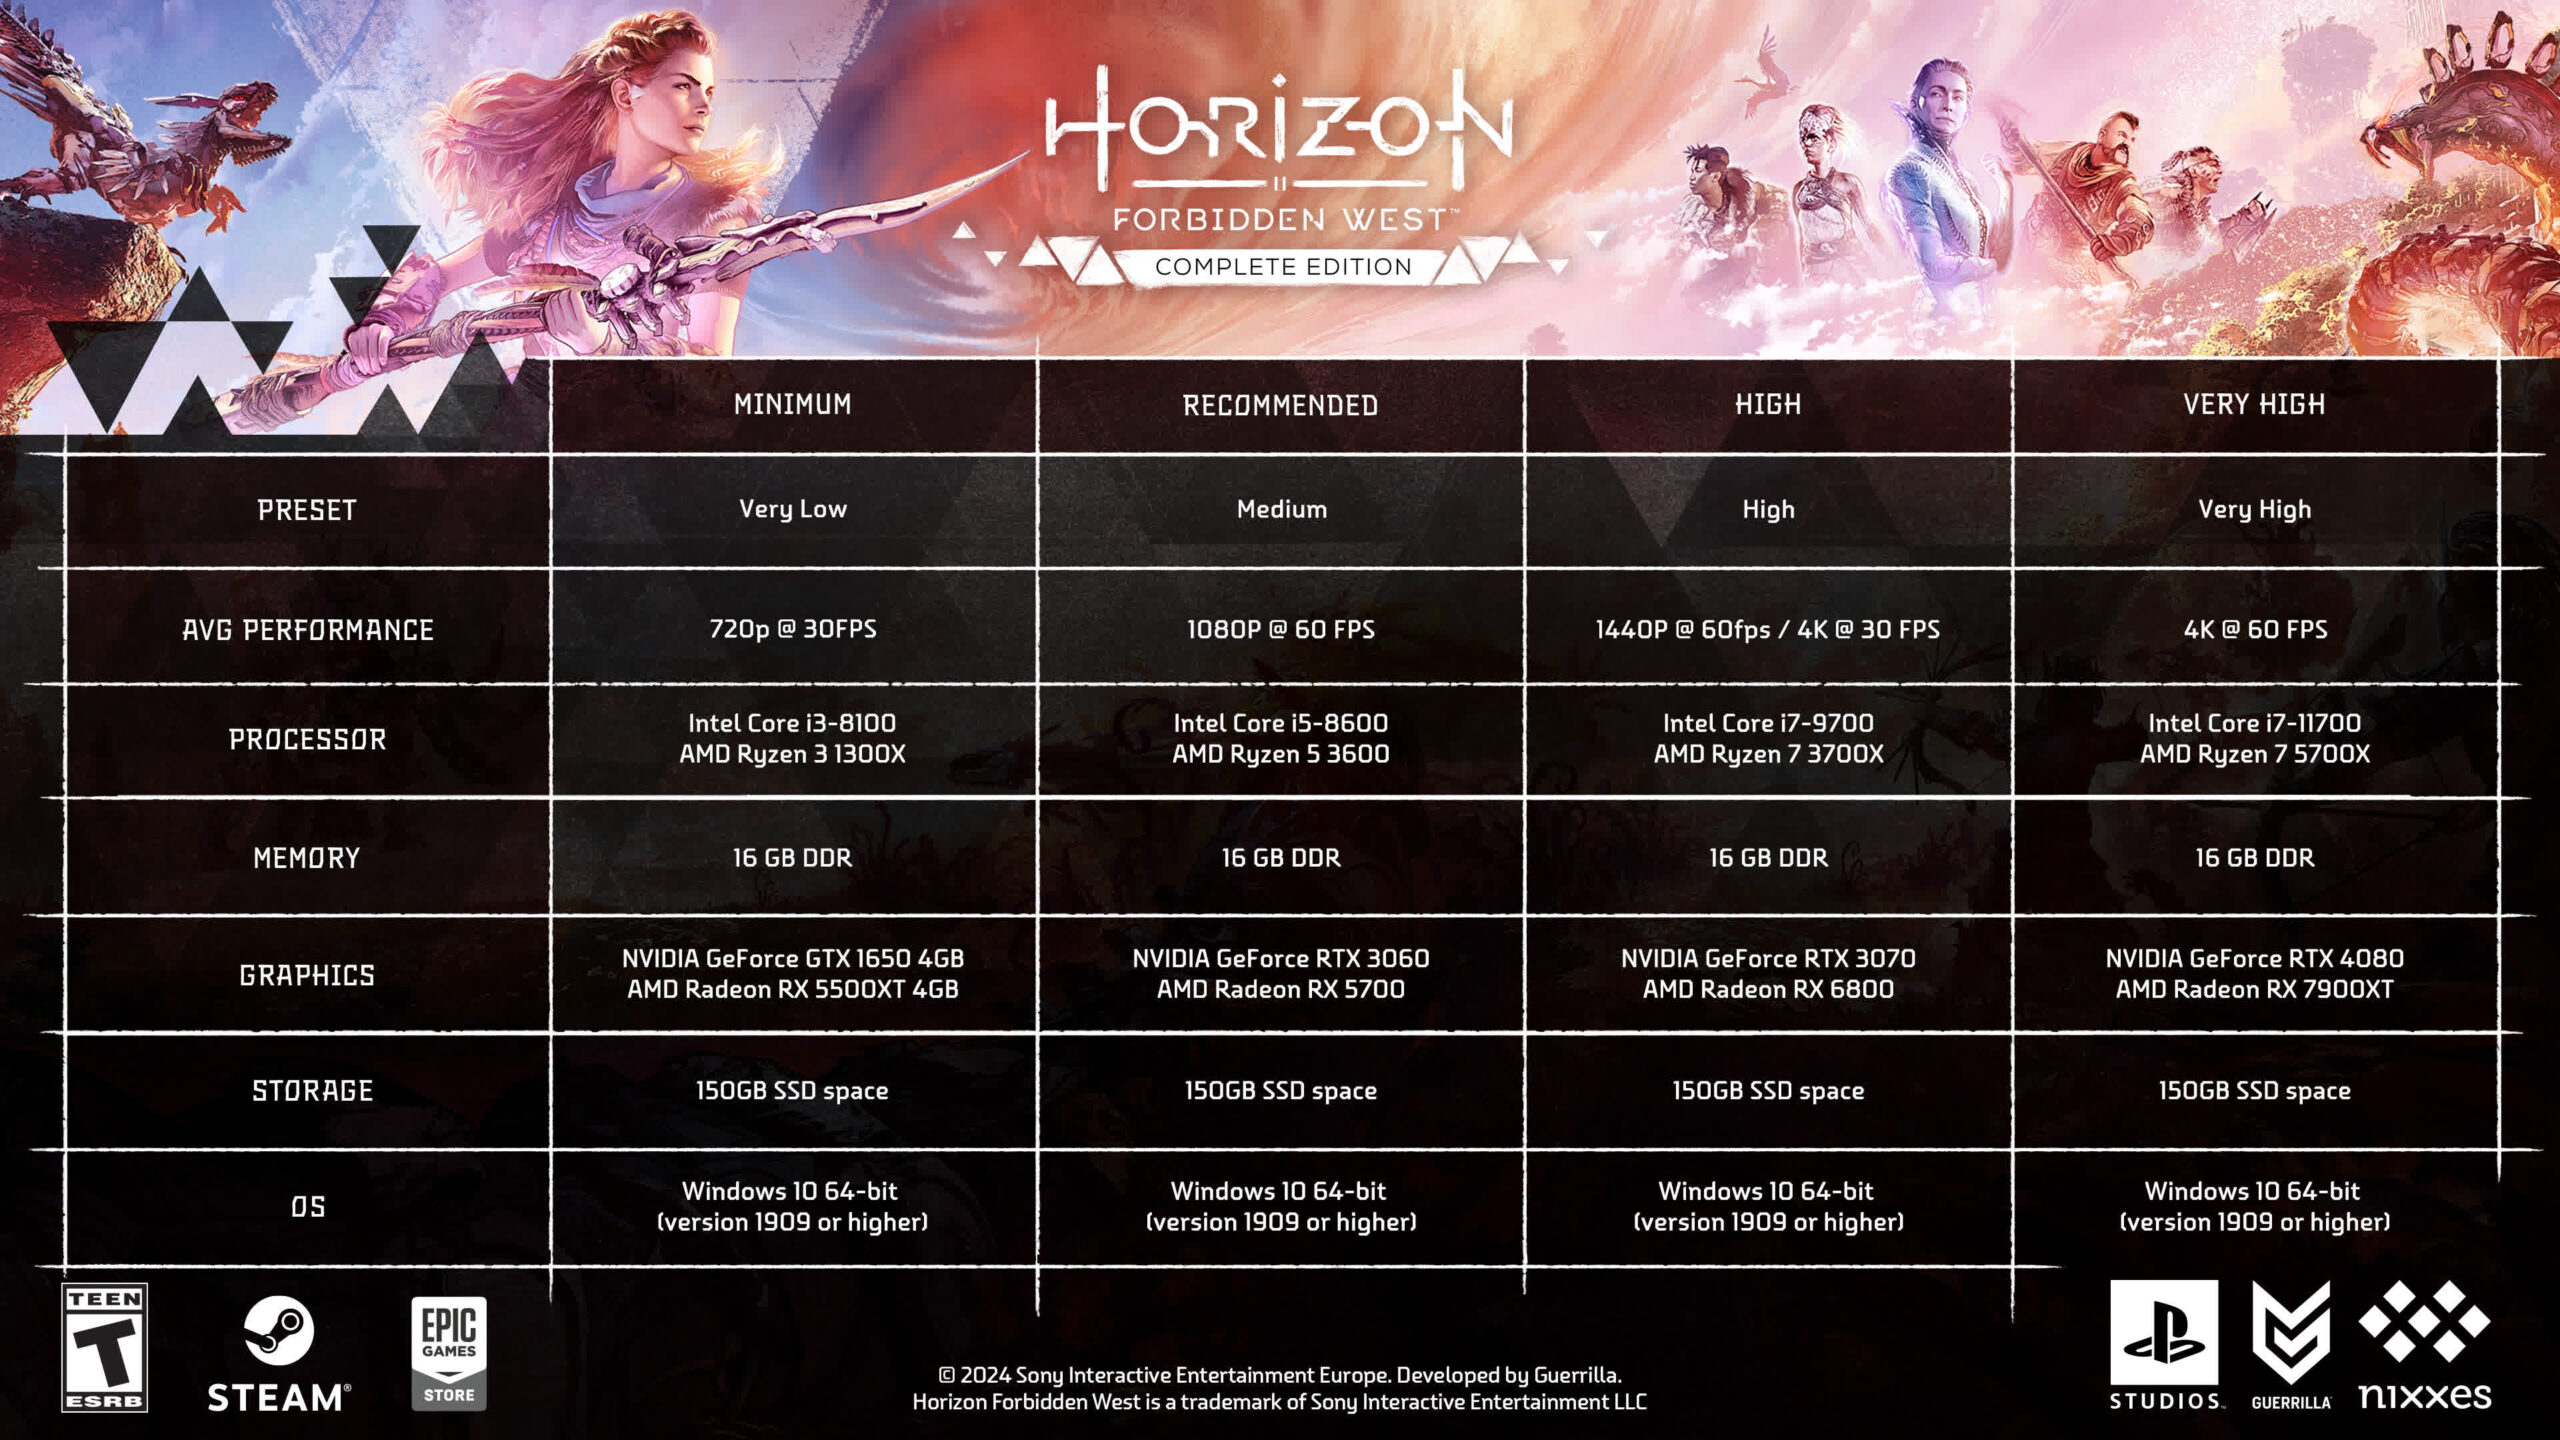 Horizon Forbidden West comes to PC on March 21, requires 150GB of storage and 16GB of RAM